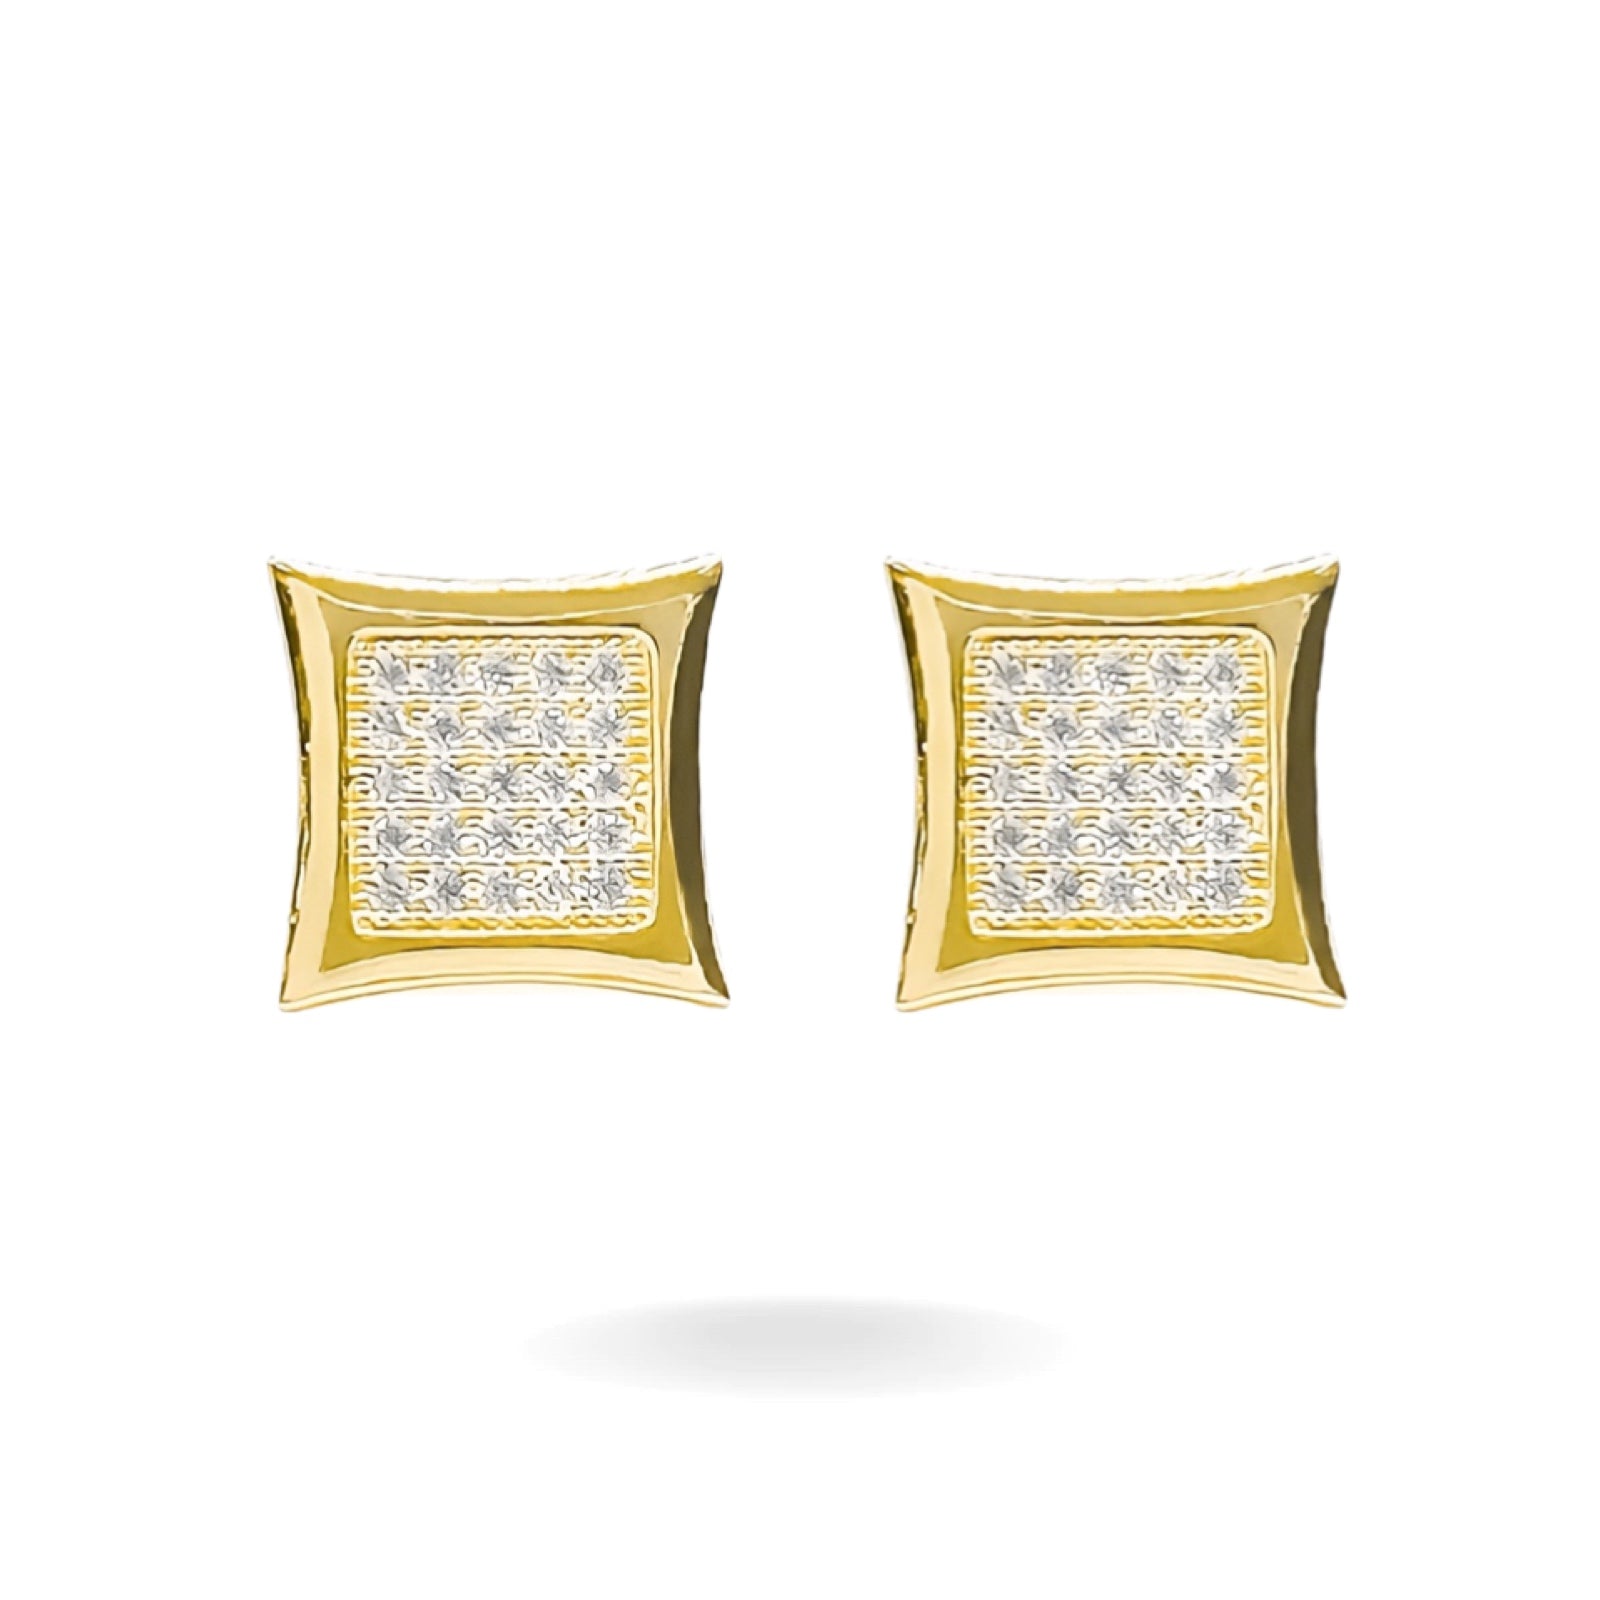 10K YELLOW GOLD PAVE PINCHED SQUARE FRAME STUD EARRINGS